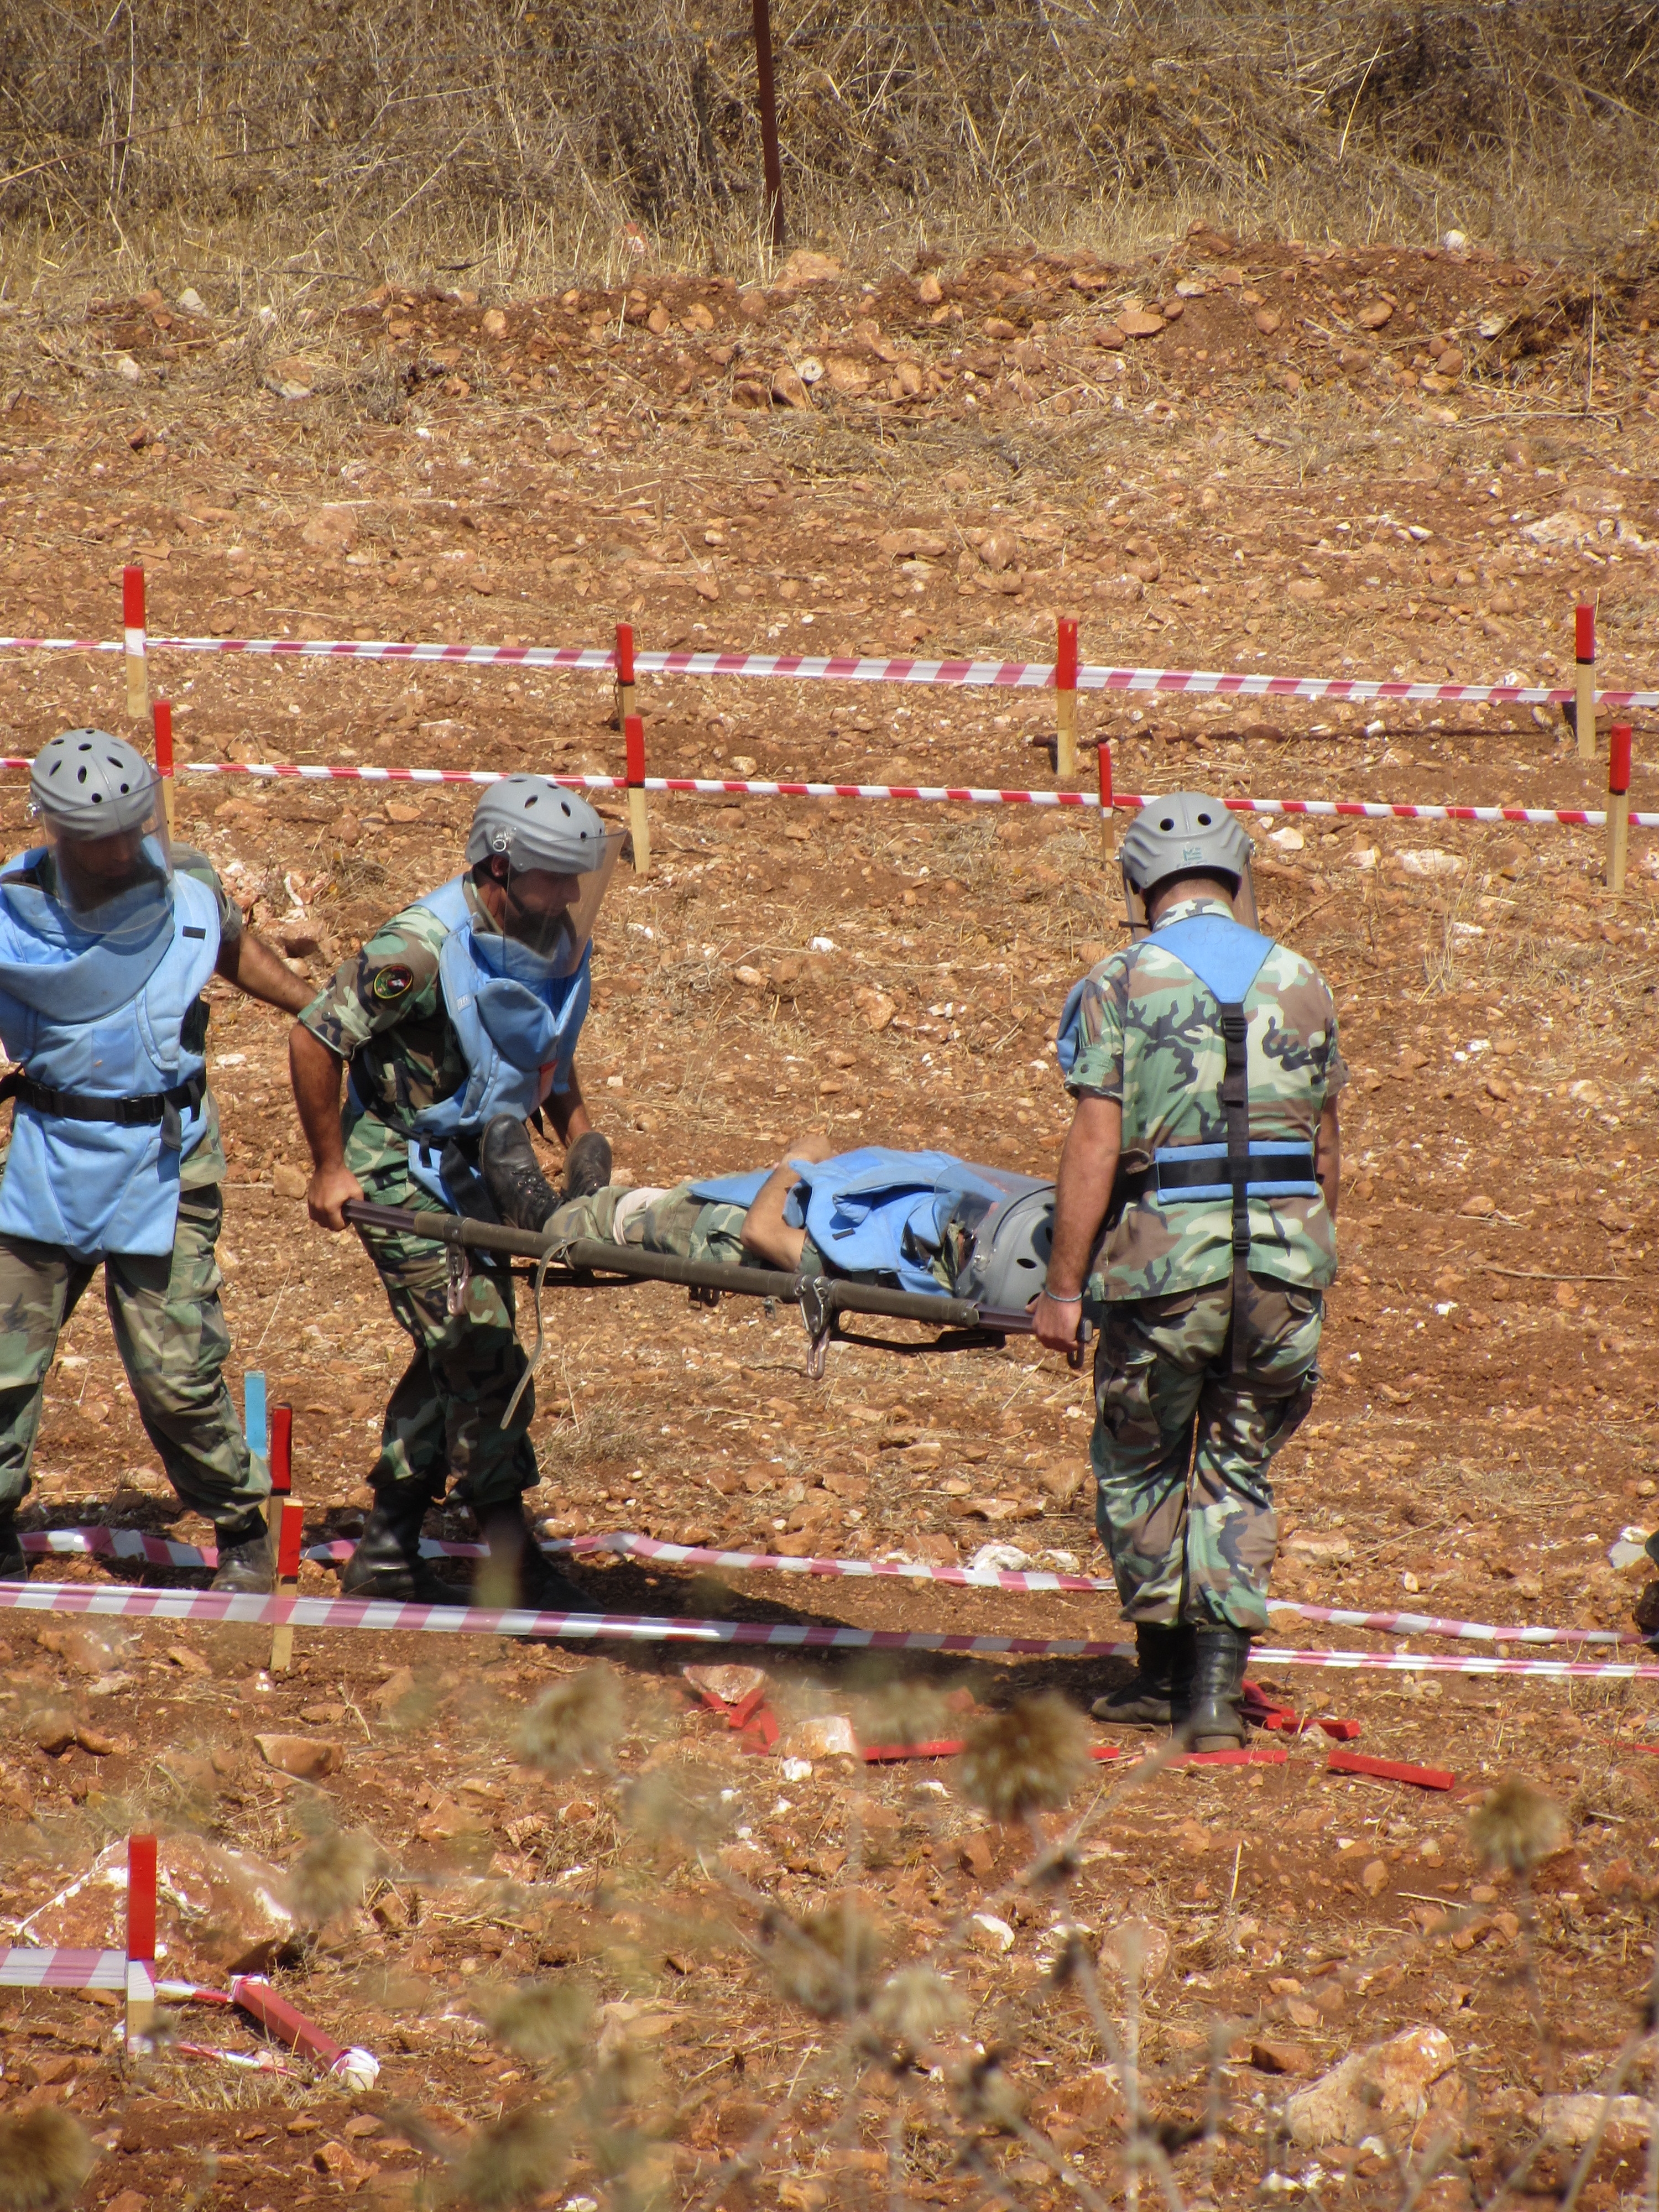 Military members wearing camouflage garb carry a stretcher with a body.